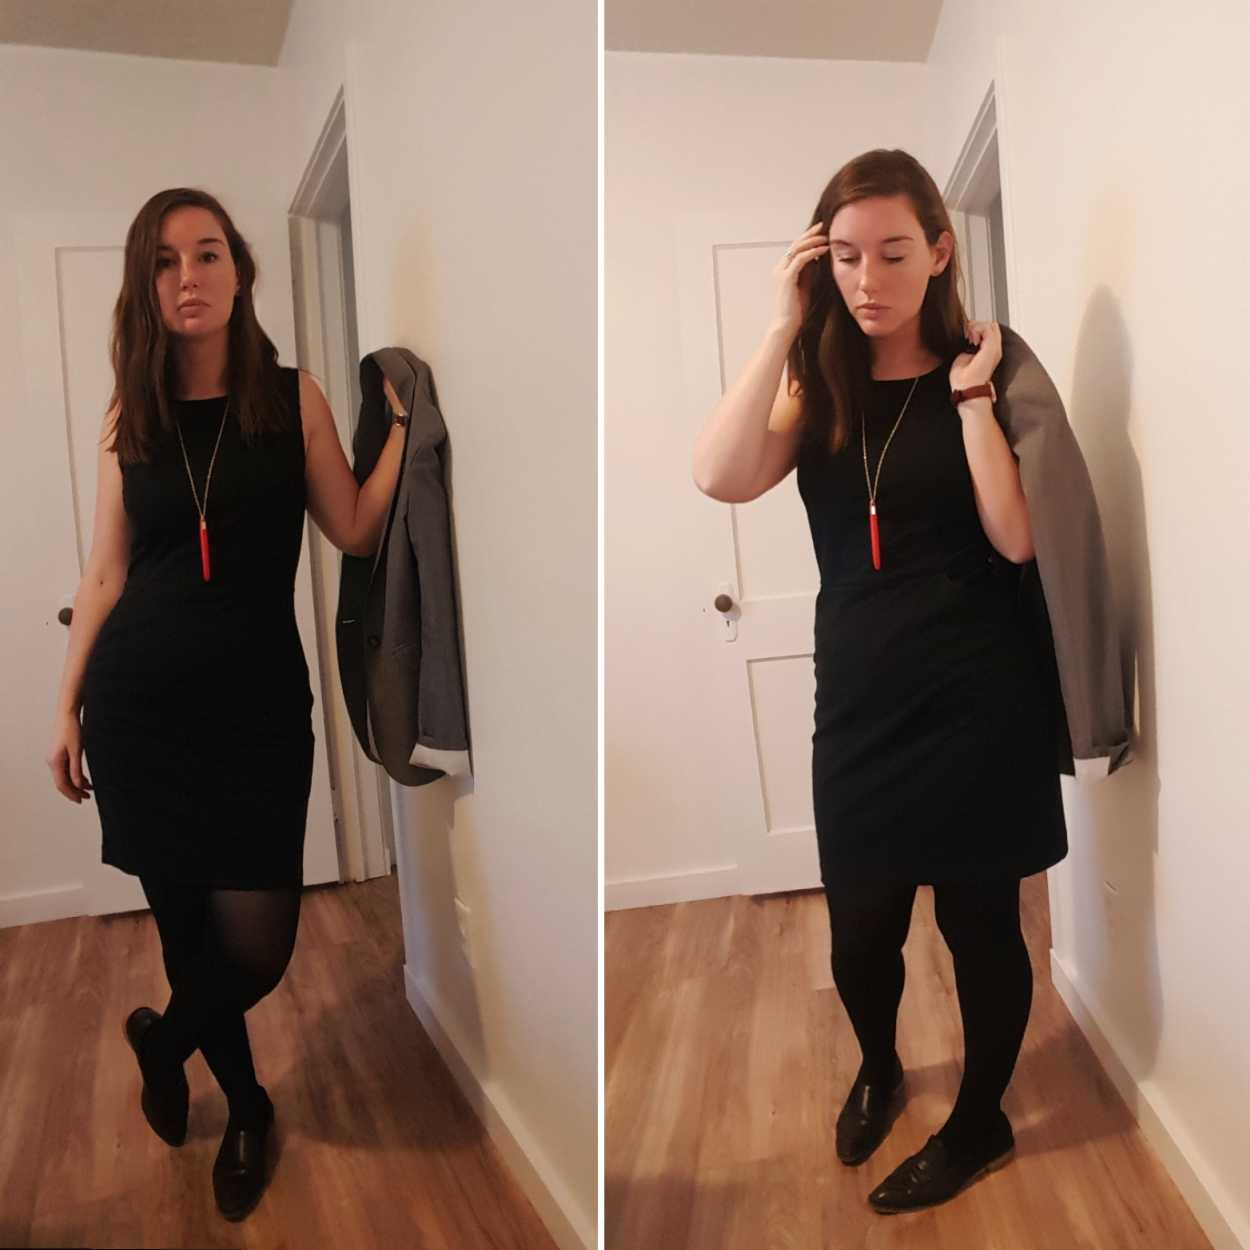 Alyssa wears a black dress, black tights, black shoes, and grey blazer at the end of the day